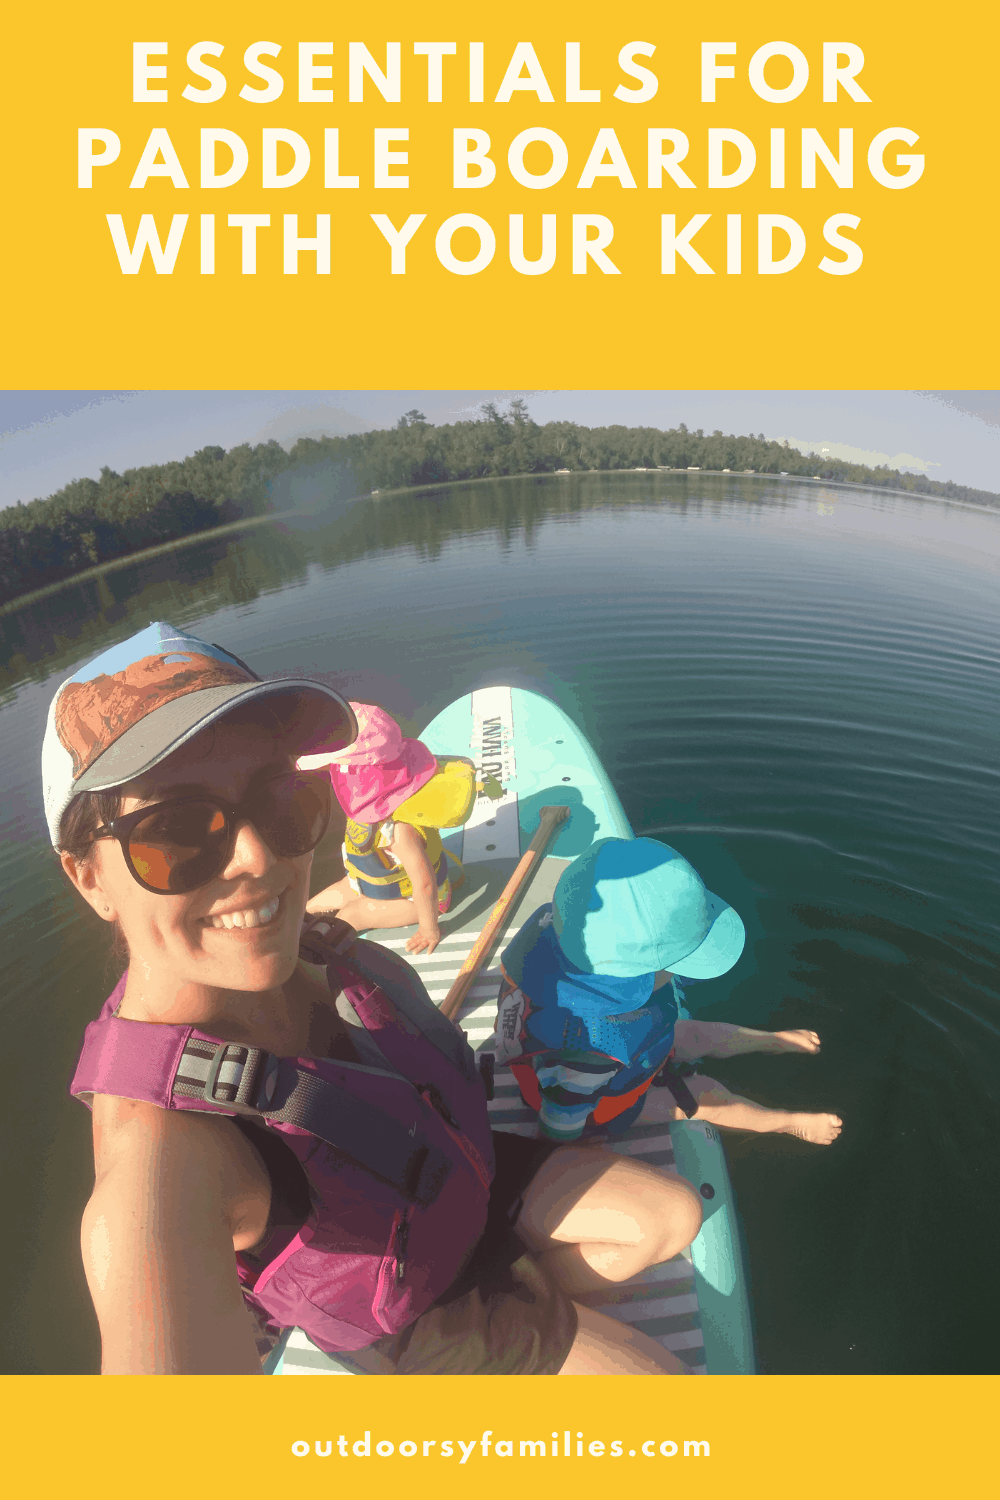 Paddleboarding with kids